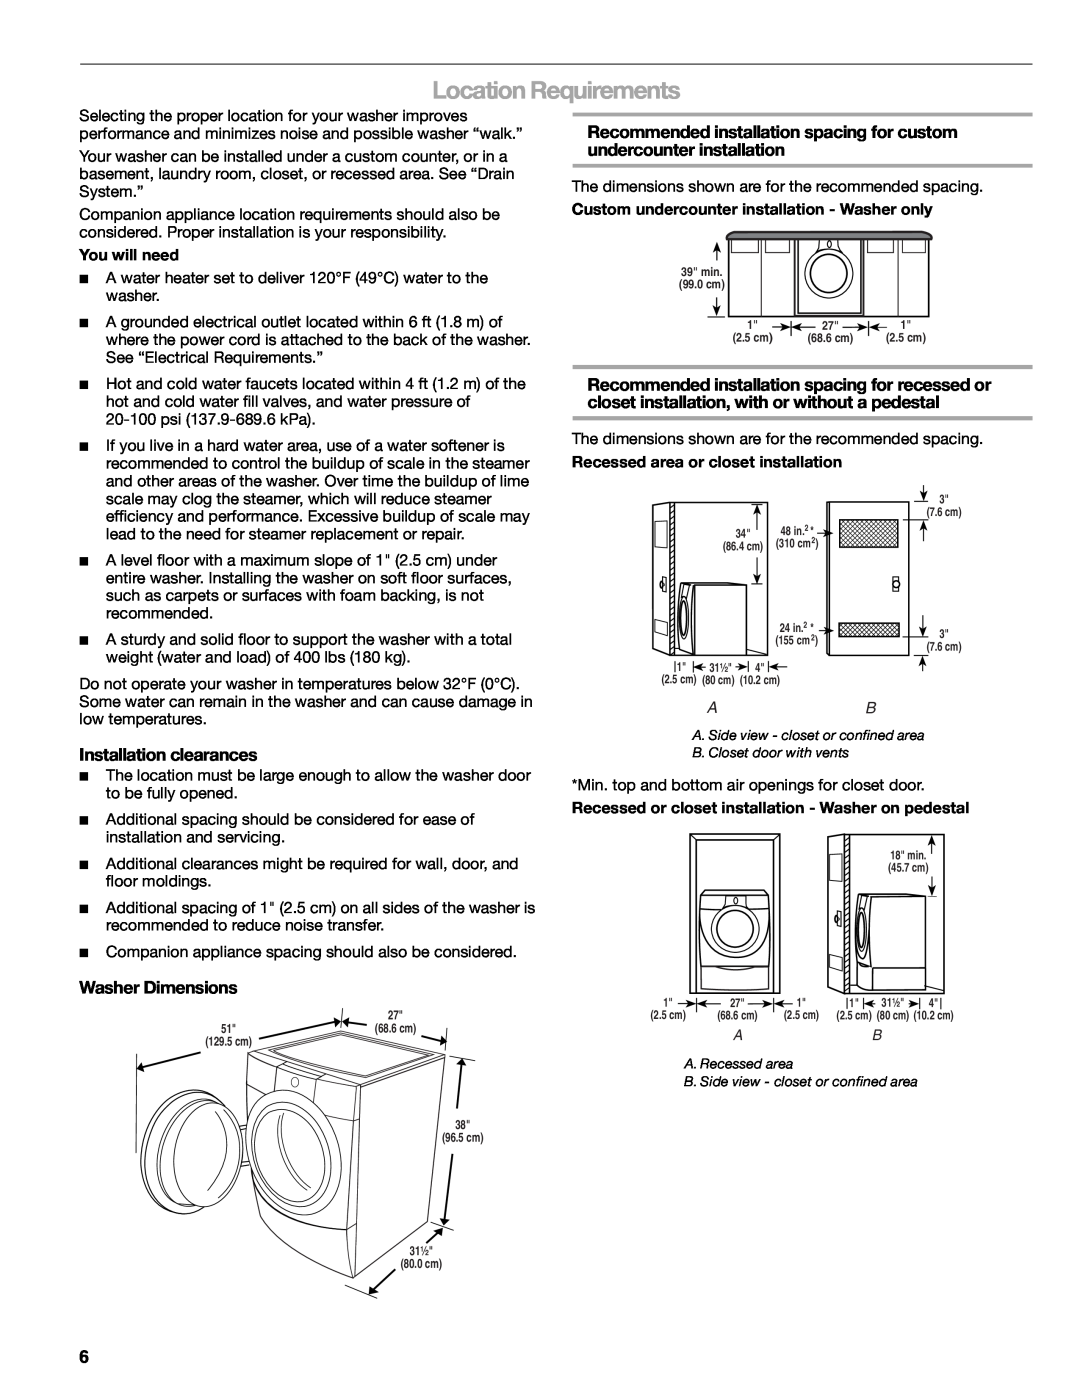 Sears 110.4779*, 110.4778* manual Location Requirements, Installation clearances, Washer Dimensions 